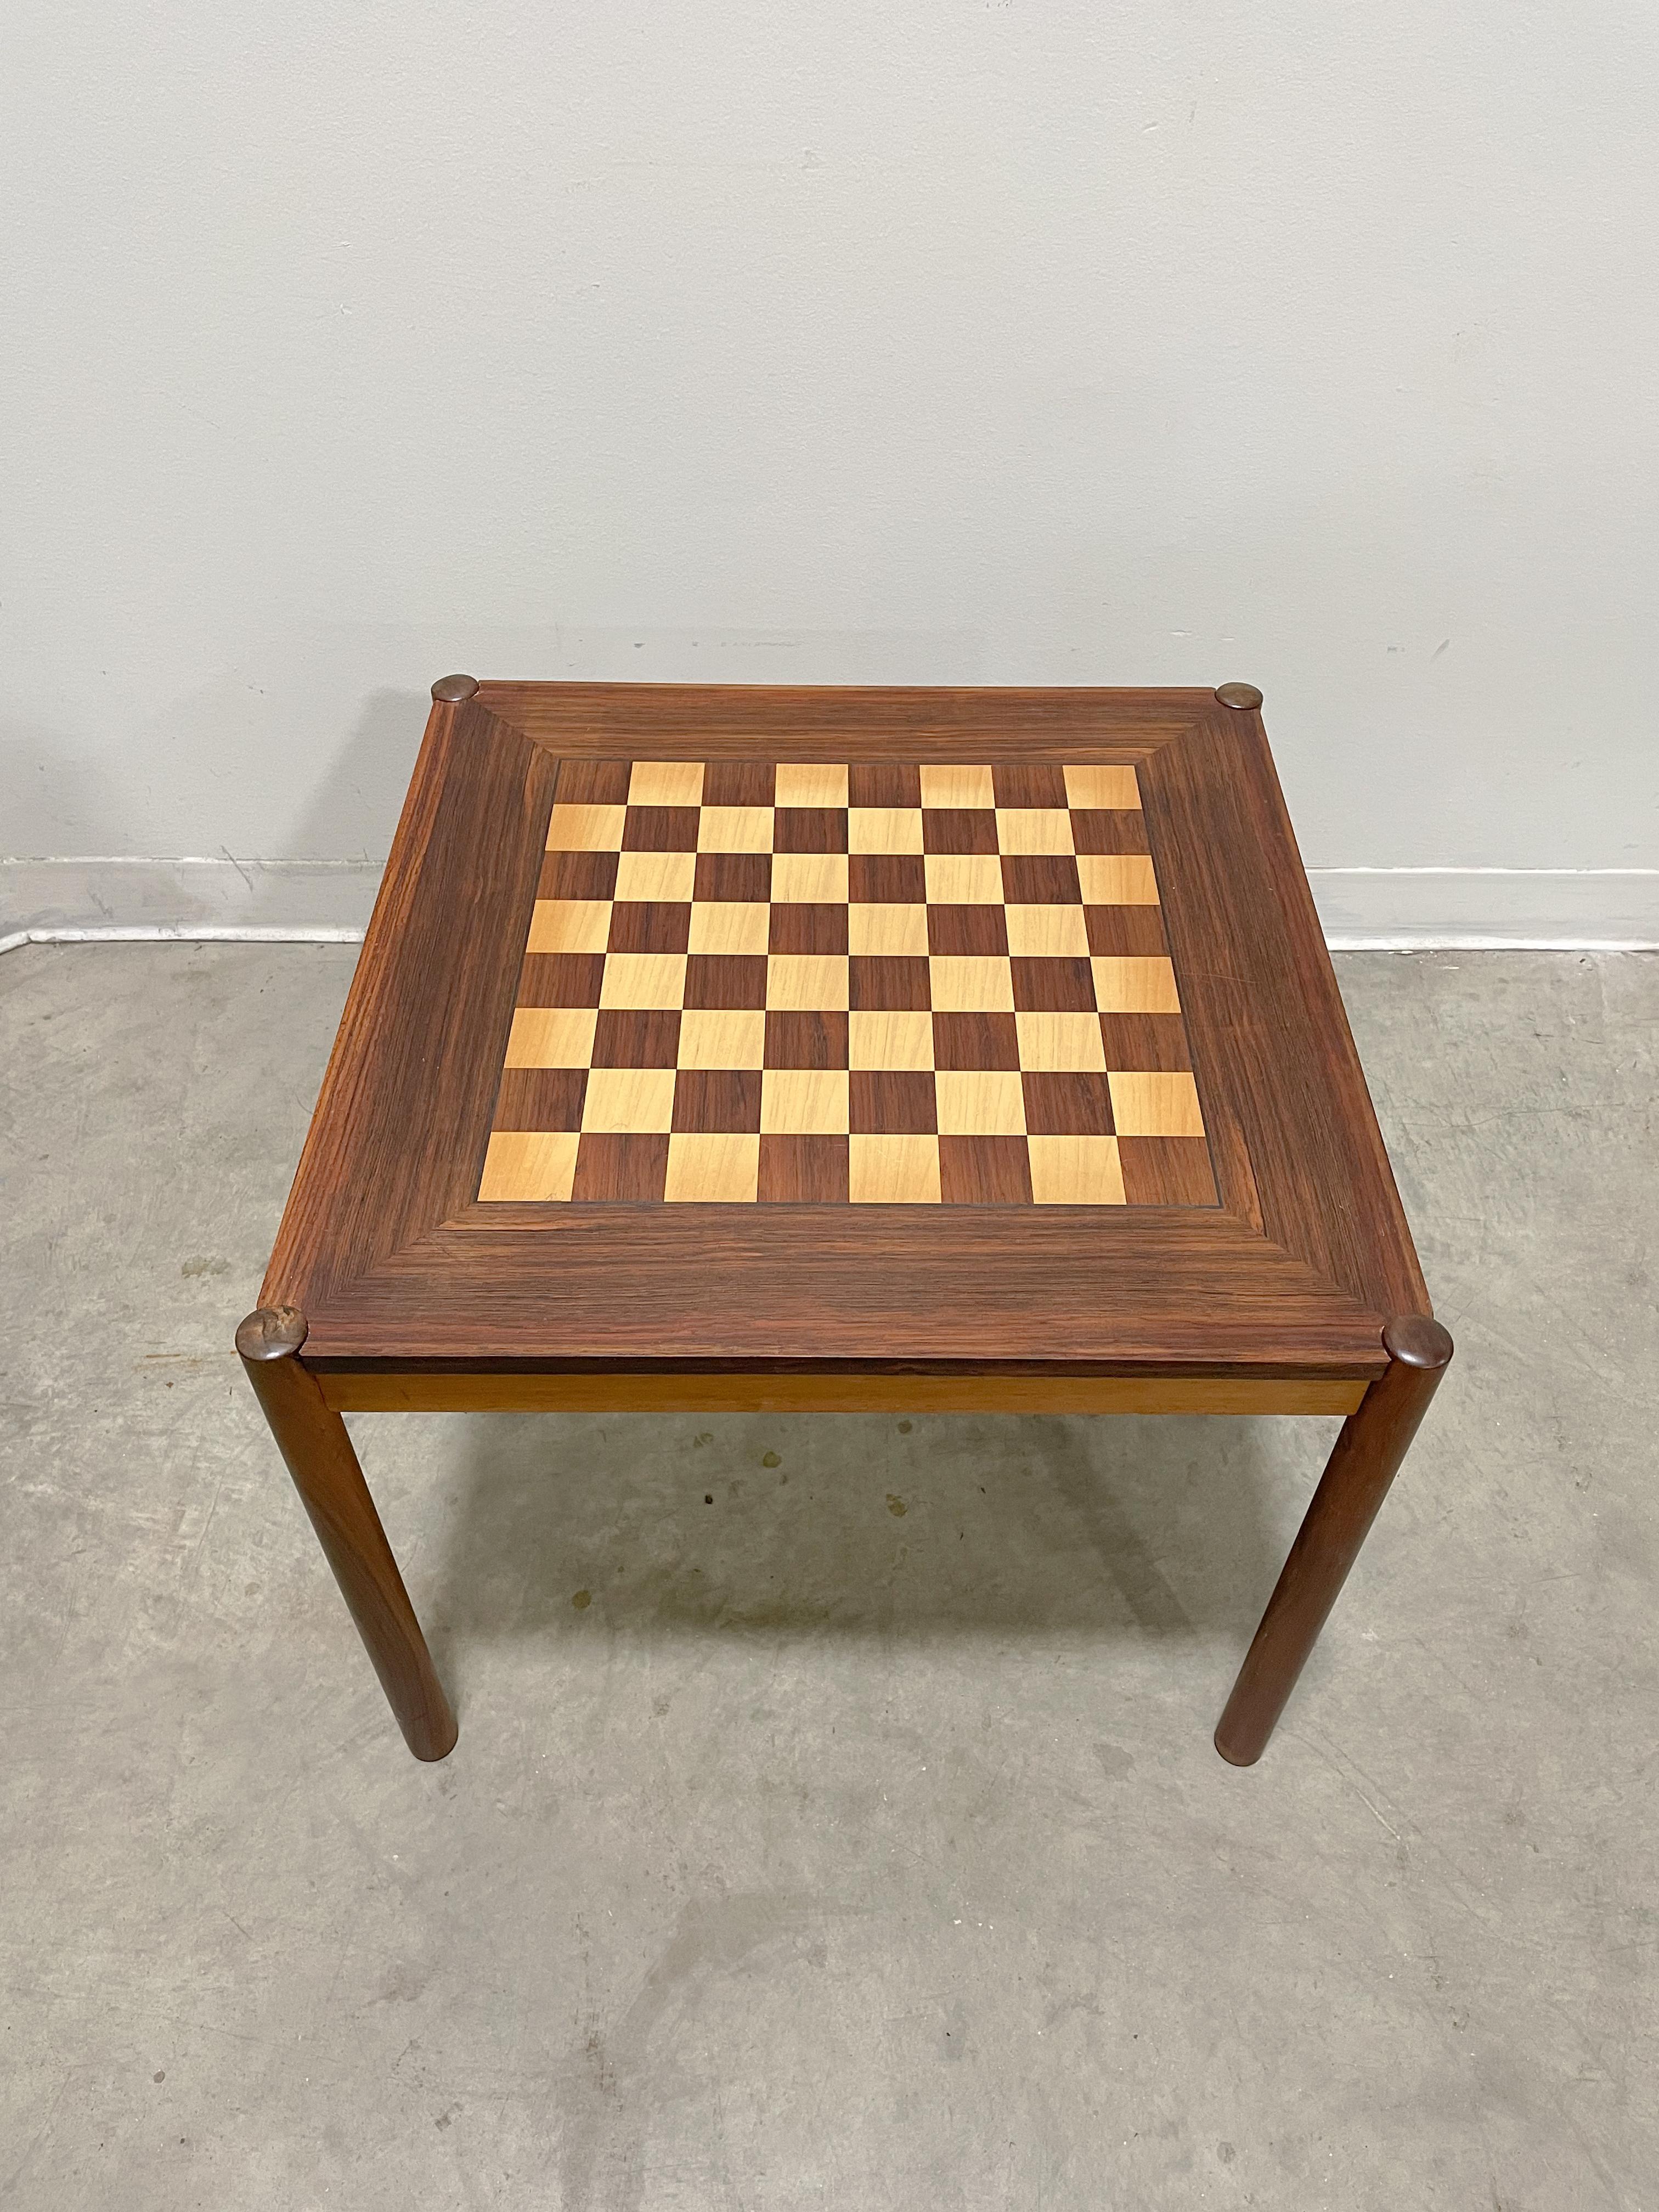 Flip top chess table with storage tray underneath. This table was designed by Georg Petersen. Solid rosewood legs with veneered top and sides. Chessboard on one side of top and rosewood grain on other. Legs bolt on making it easily collapsible for